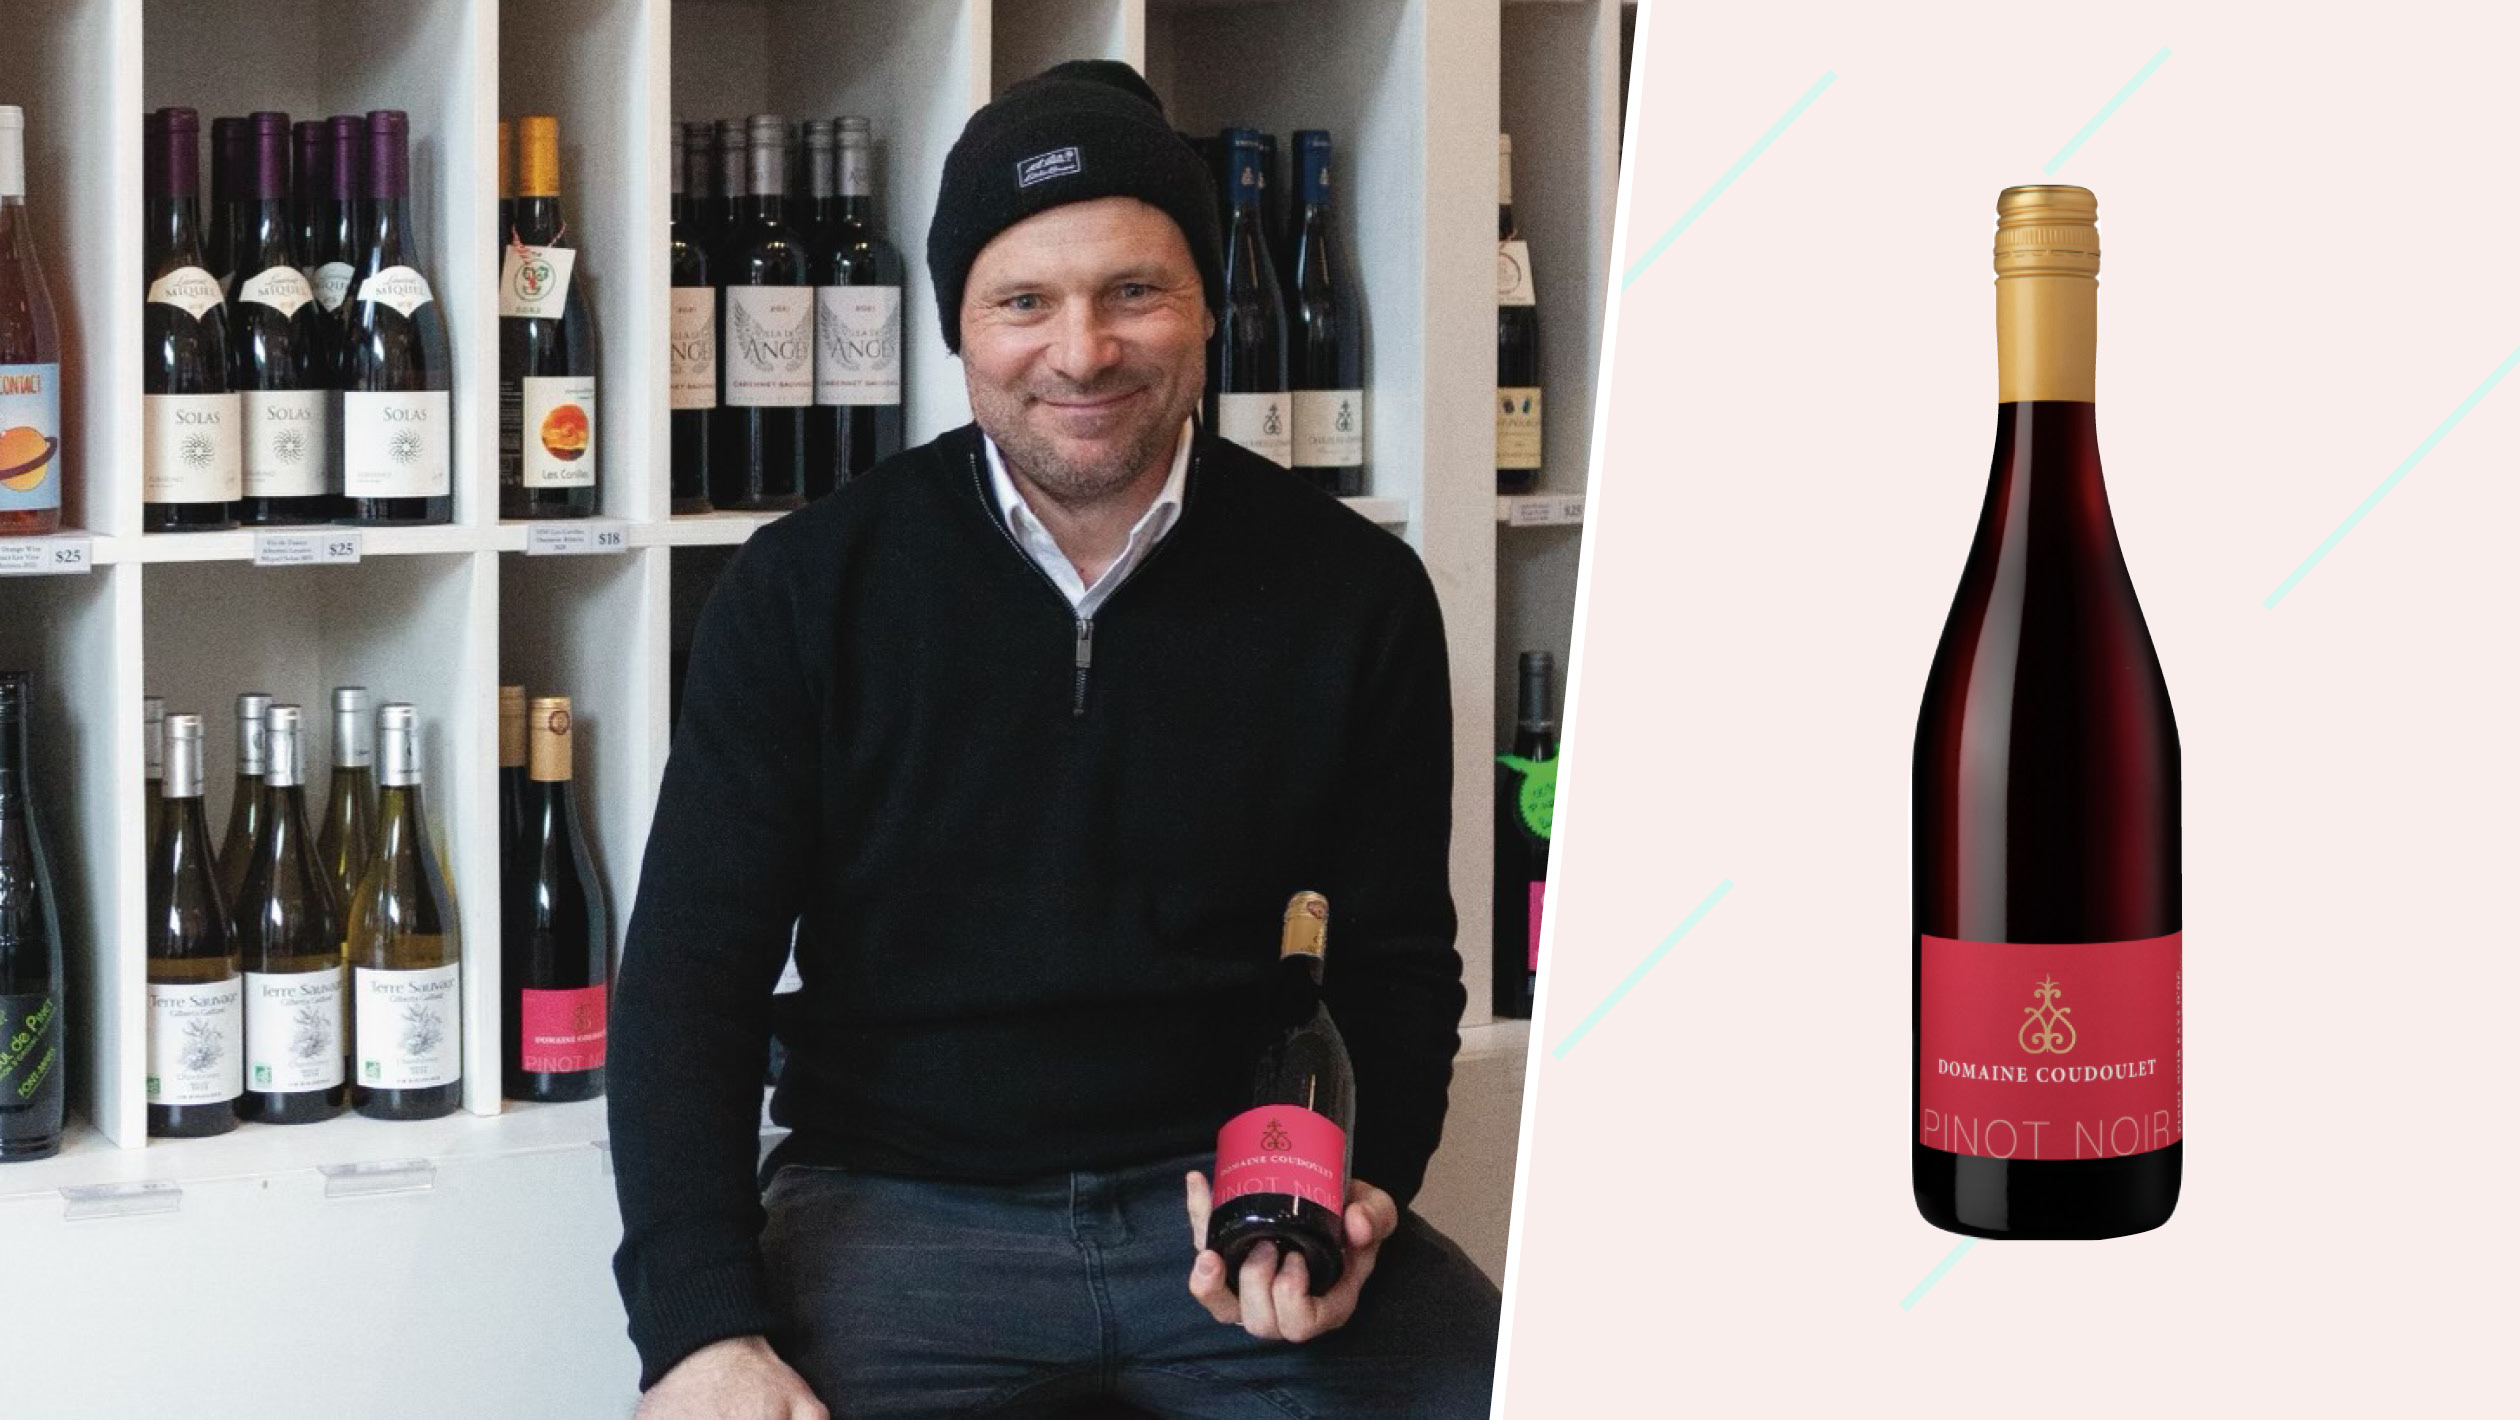 Domaine Coudoulet Pinot Noir, selected by Eric Foret, the wine buyer for Le French Wine Shop. Photos courtesy of Le French Wine Shop and Domain Coudoulet.